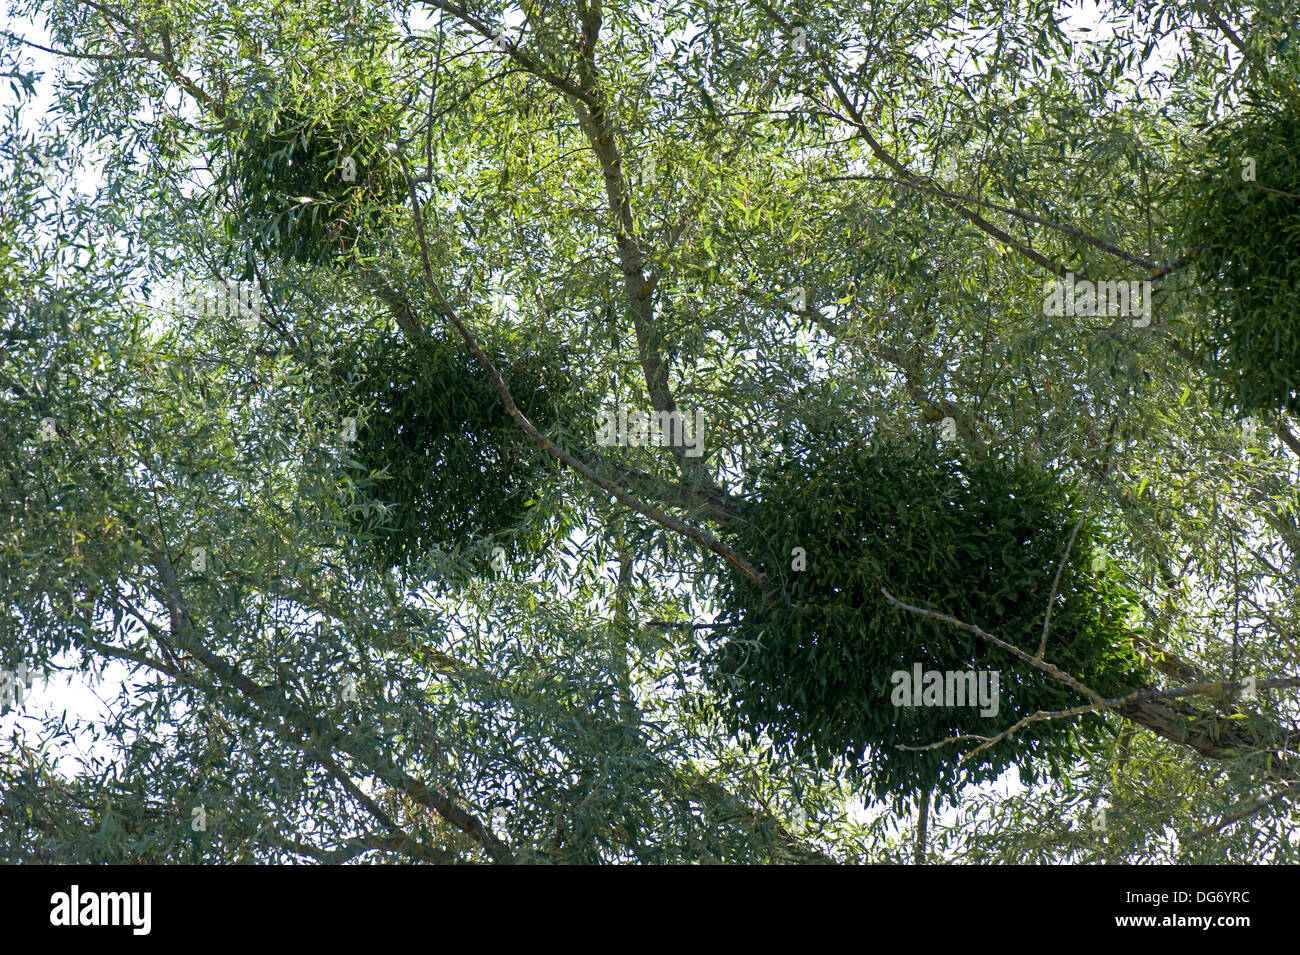 European mistletoe, Viscum album, a hemi-parasite growing in a willow tree on the banks of the River Dordogne, Gironde, France Stock Photo